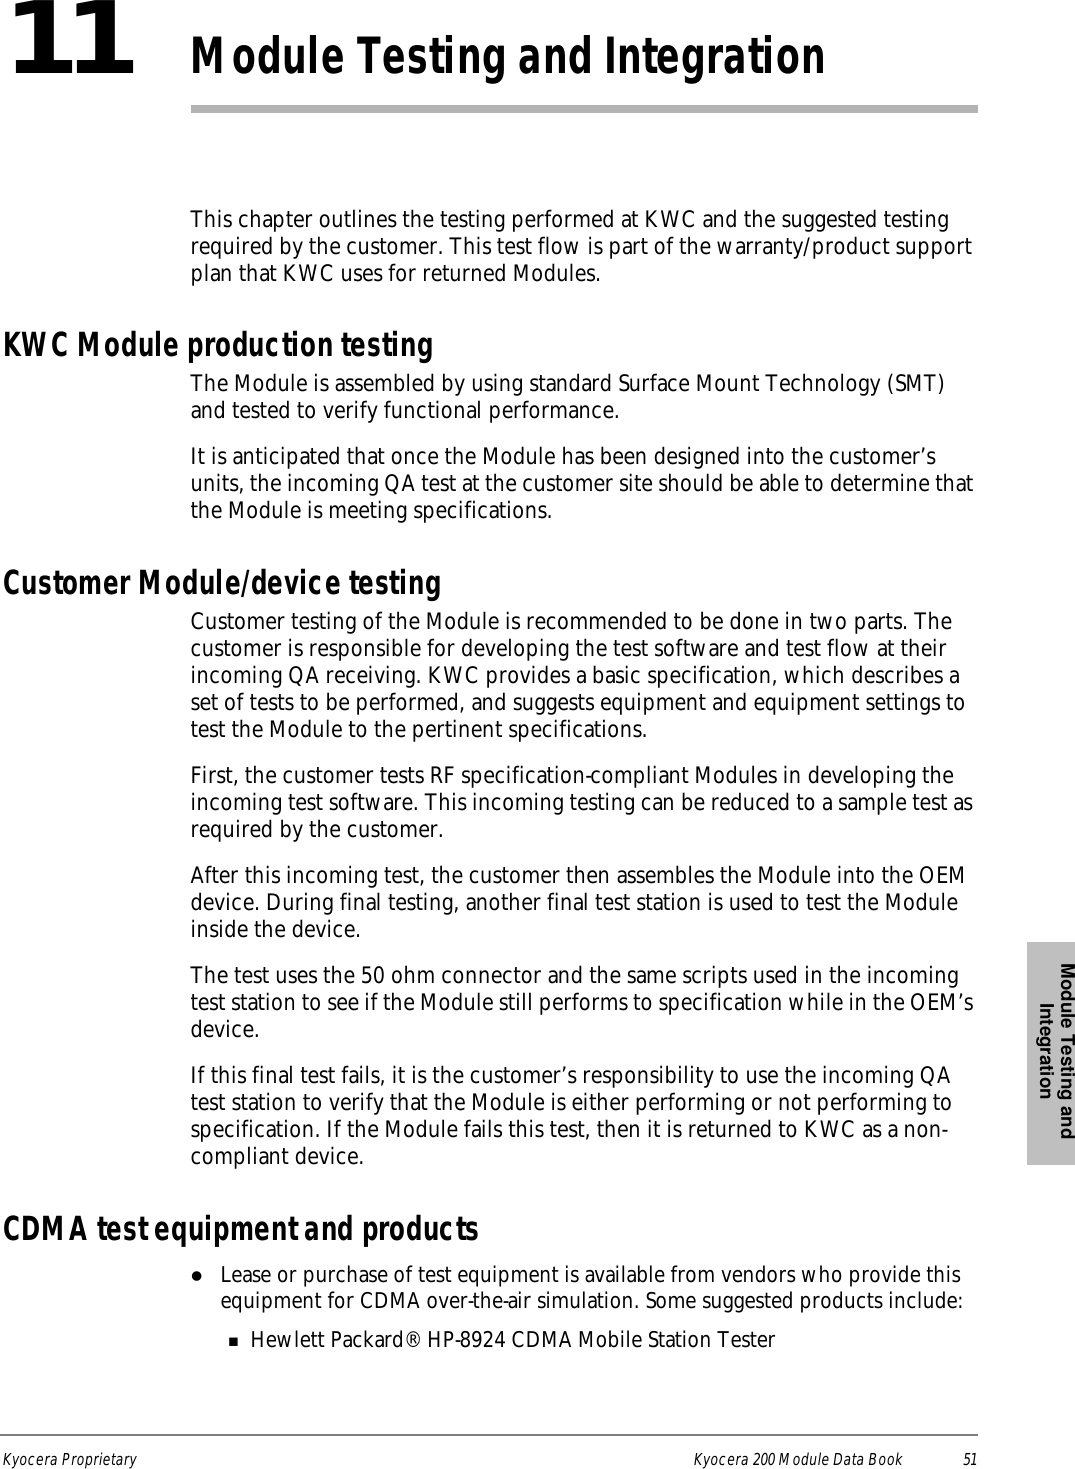 Module Testing and IntegrationKyocera Proprietary Kyocera 200 Module Data Book 5111Module Testing and IntegrationThis chapter outlines the testing performed at KWC and the suggested testing required by the customer. This test flow is part of the warranty/product support plan that KWC uses for returned Modules.KWC Module production testingThe Module is assembled by using standard Surface Mount Technology (SMT) and tested to verify functional performance. It is anticipated that once the Module has been designed into the customer’s units, the incoming QA test at the customer site should be able to determine that the Module is meeting specifications. Customer Module/device testingCustomer testing of the Module is recommended to be done in two parts. The customer is responsible for developing the test software and test flow at their incoming QA receiving. KWC provides a basic specification, which describes a set of tests to be performed, and suggests equipment and equipment settings to test the Module to the pertinent specifications.First, the customer tests RF specification-compliant Modules in developing the incoming test software. This incoming testing can be reduced to a sample test as required by the customer.After this incoming test, the customer then assembles the Module into the OEM device. During final testing, another final test station is used to test the Module inside the device.The test uses the 50 ohm connector and the same scripts used in the incoming test station to see if the Module still performs to specification while in the OEM’s device.If this final test fails, it is the customer’s responsibility to use the incoming QA test station to verify that the Module is either performing or not performing to specification. If the Module fails this test, then it is returned to KWC as a non-compliant device. CDMA test equipment and productslLease or purchase of test equipment is available from vendors who provide this equipment for CDMA over-the-air simulation. Some suggested products include:nHewlett Packard® HP-8924 CDMA Mobile Station Tester 